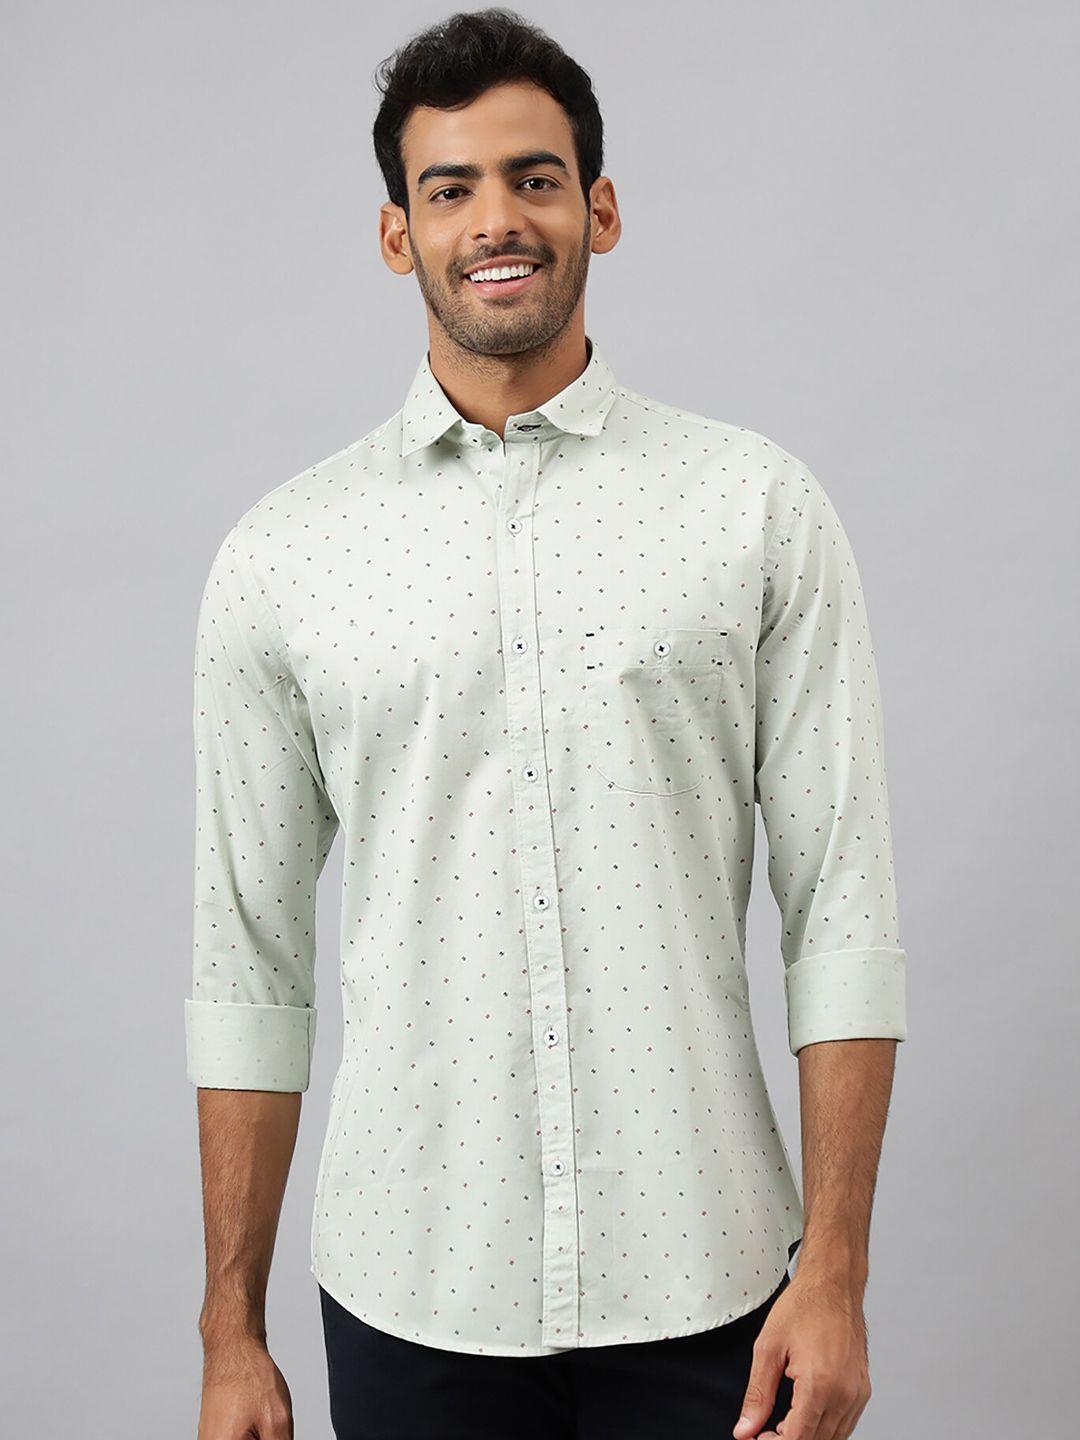 mr-button-micro-ditsy-printed-slim-fit-cotton-casual-shirt